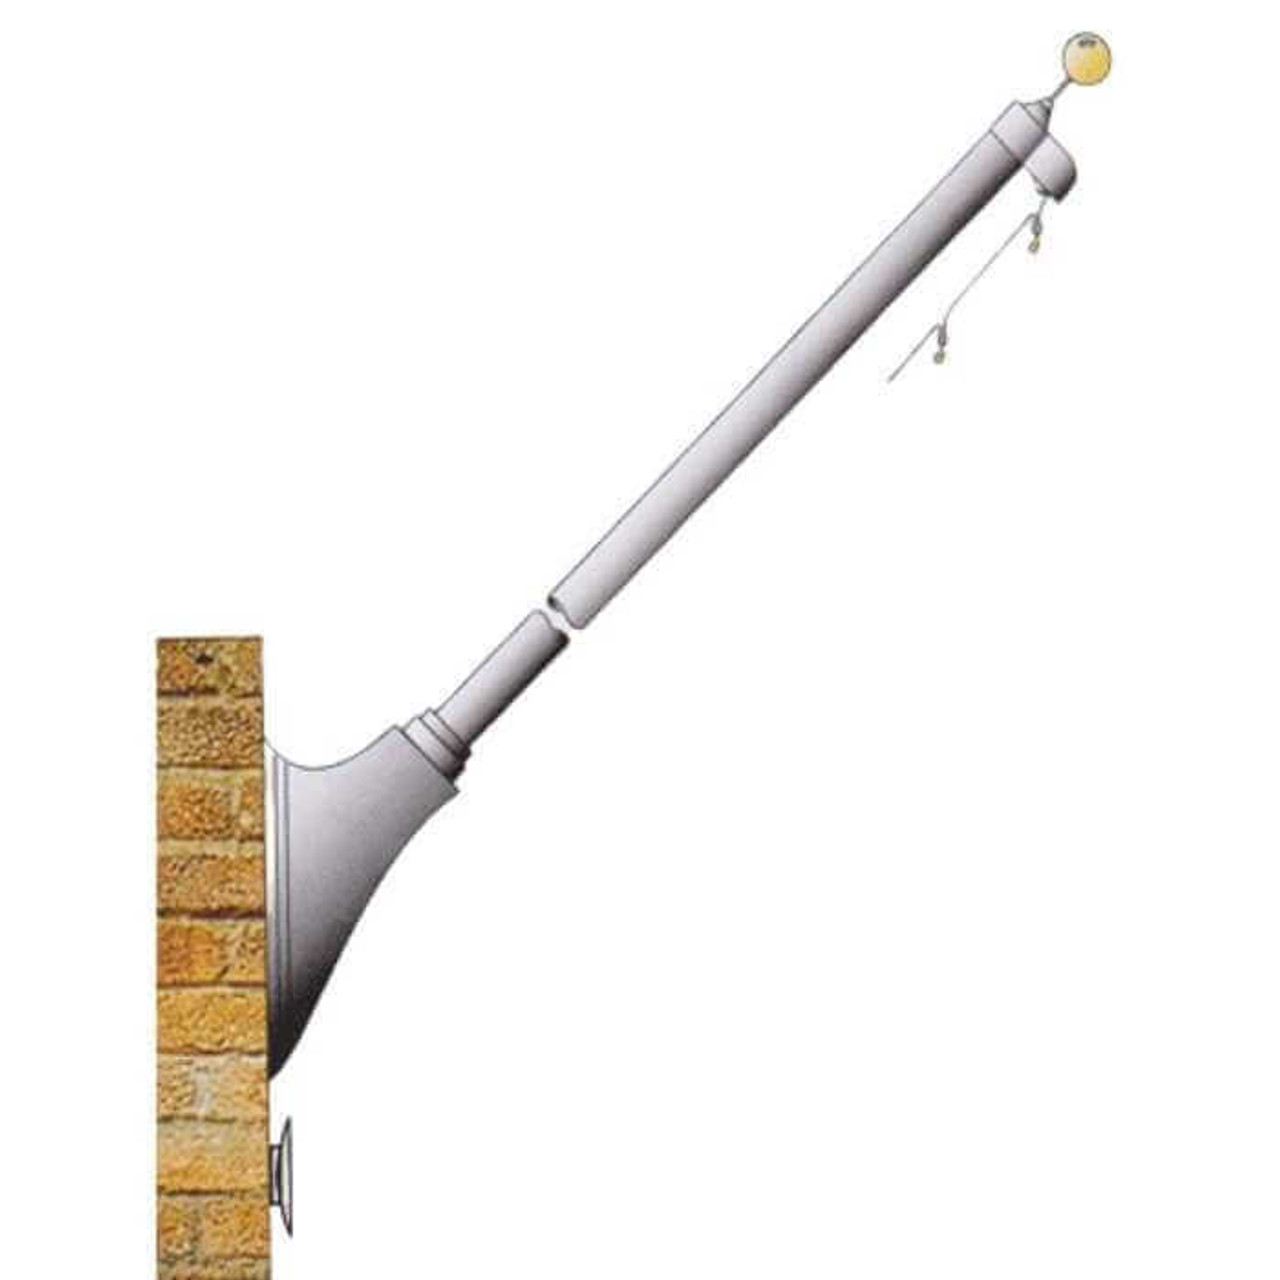 8 Non-Tapered Wall Mounted Flagpole ECOS8